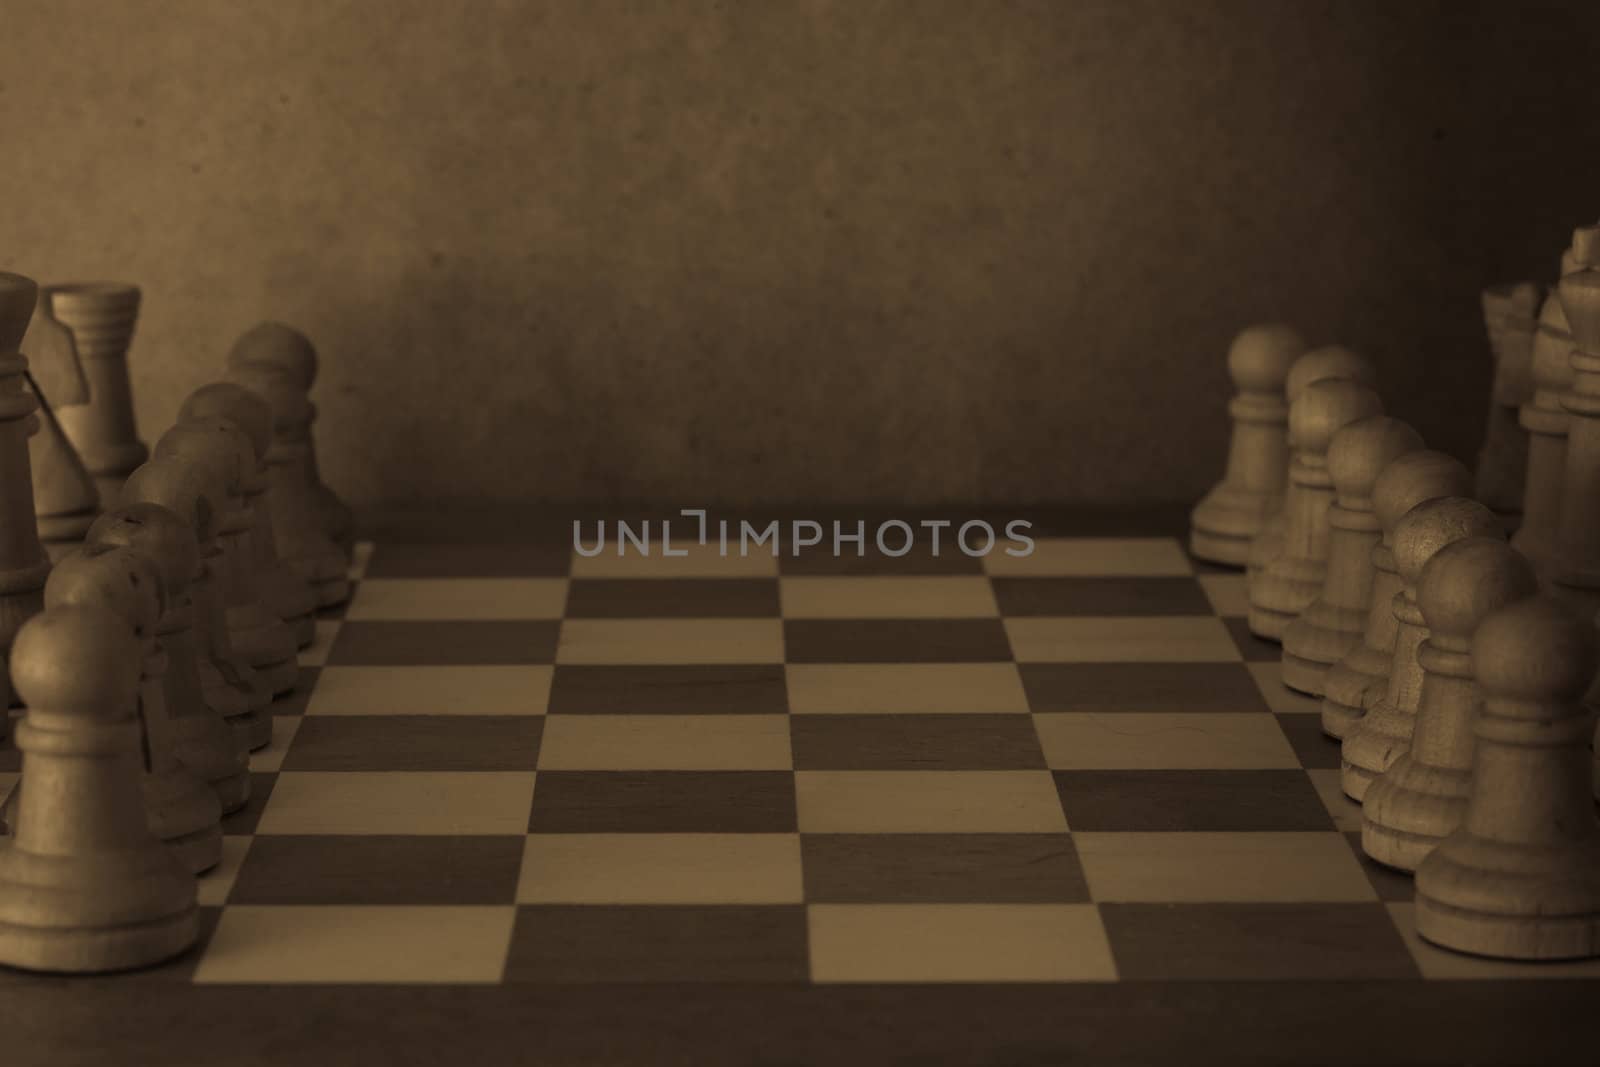 A black and white image of an old chess set